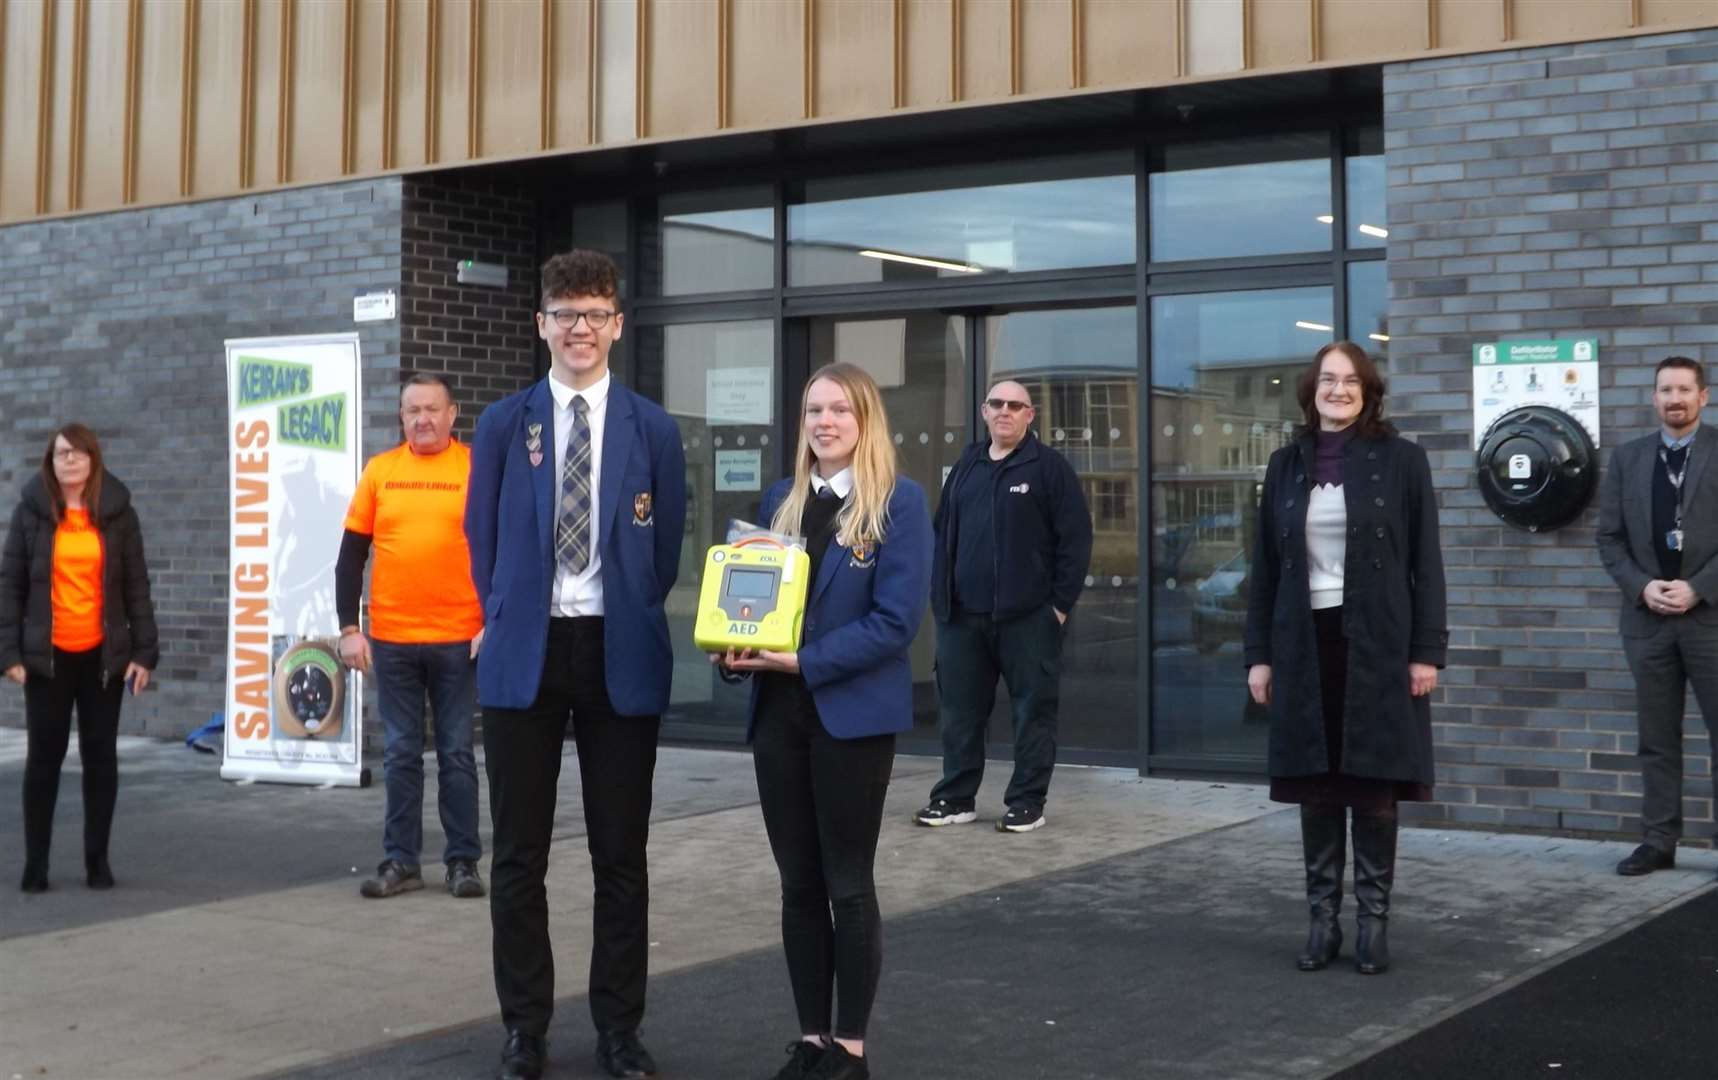 Pupils Christopher Forbes and Caitlin Dick were joined by representatives of the groups involved for the installation of a new defibrillator at the Community Campus.